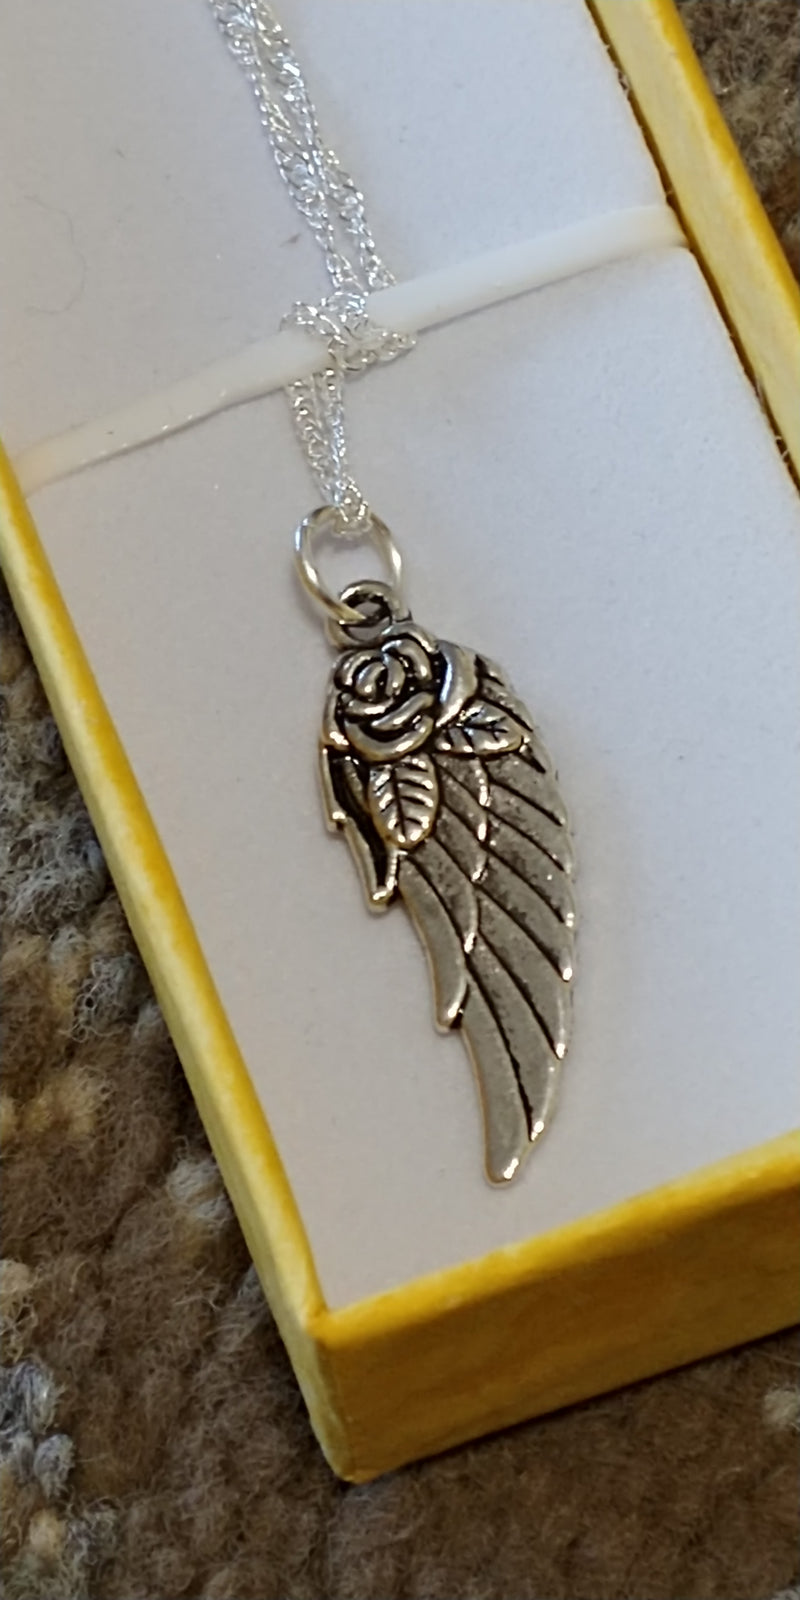 Six Shooter Heritage Rose Wing Necklace Vintage Silver + FREE Matching Earrings